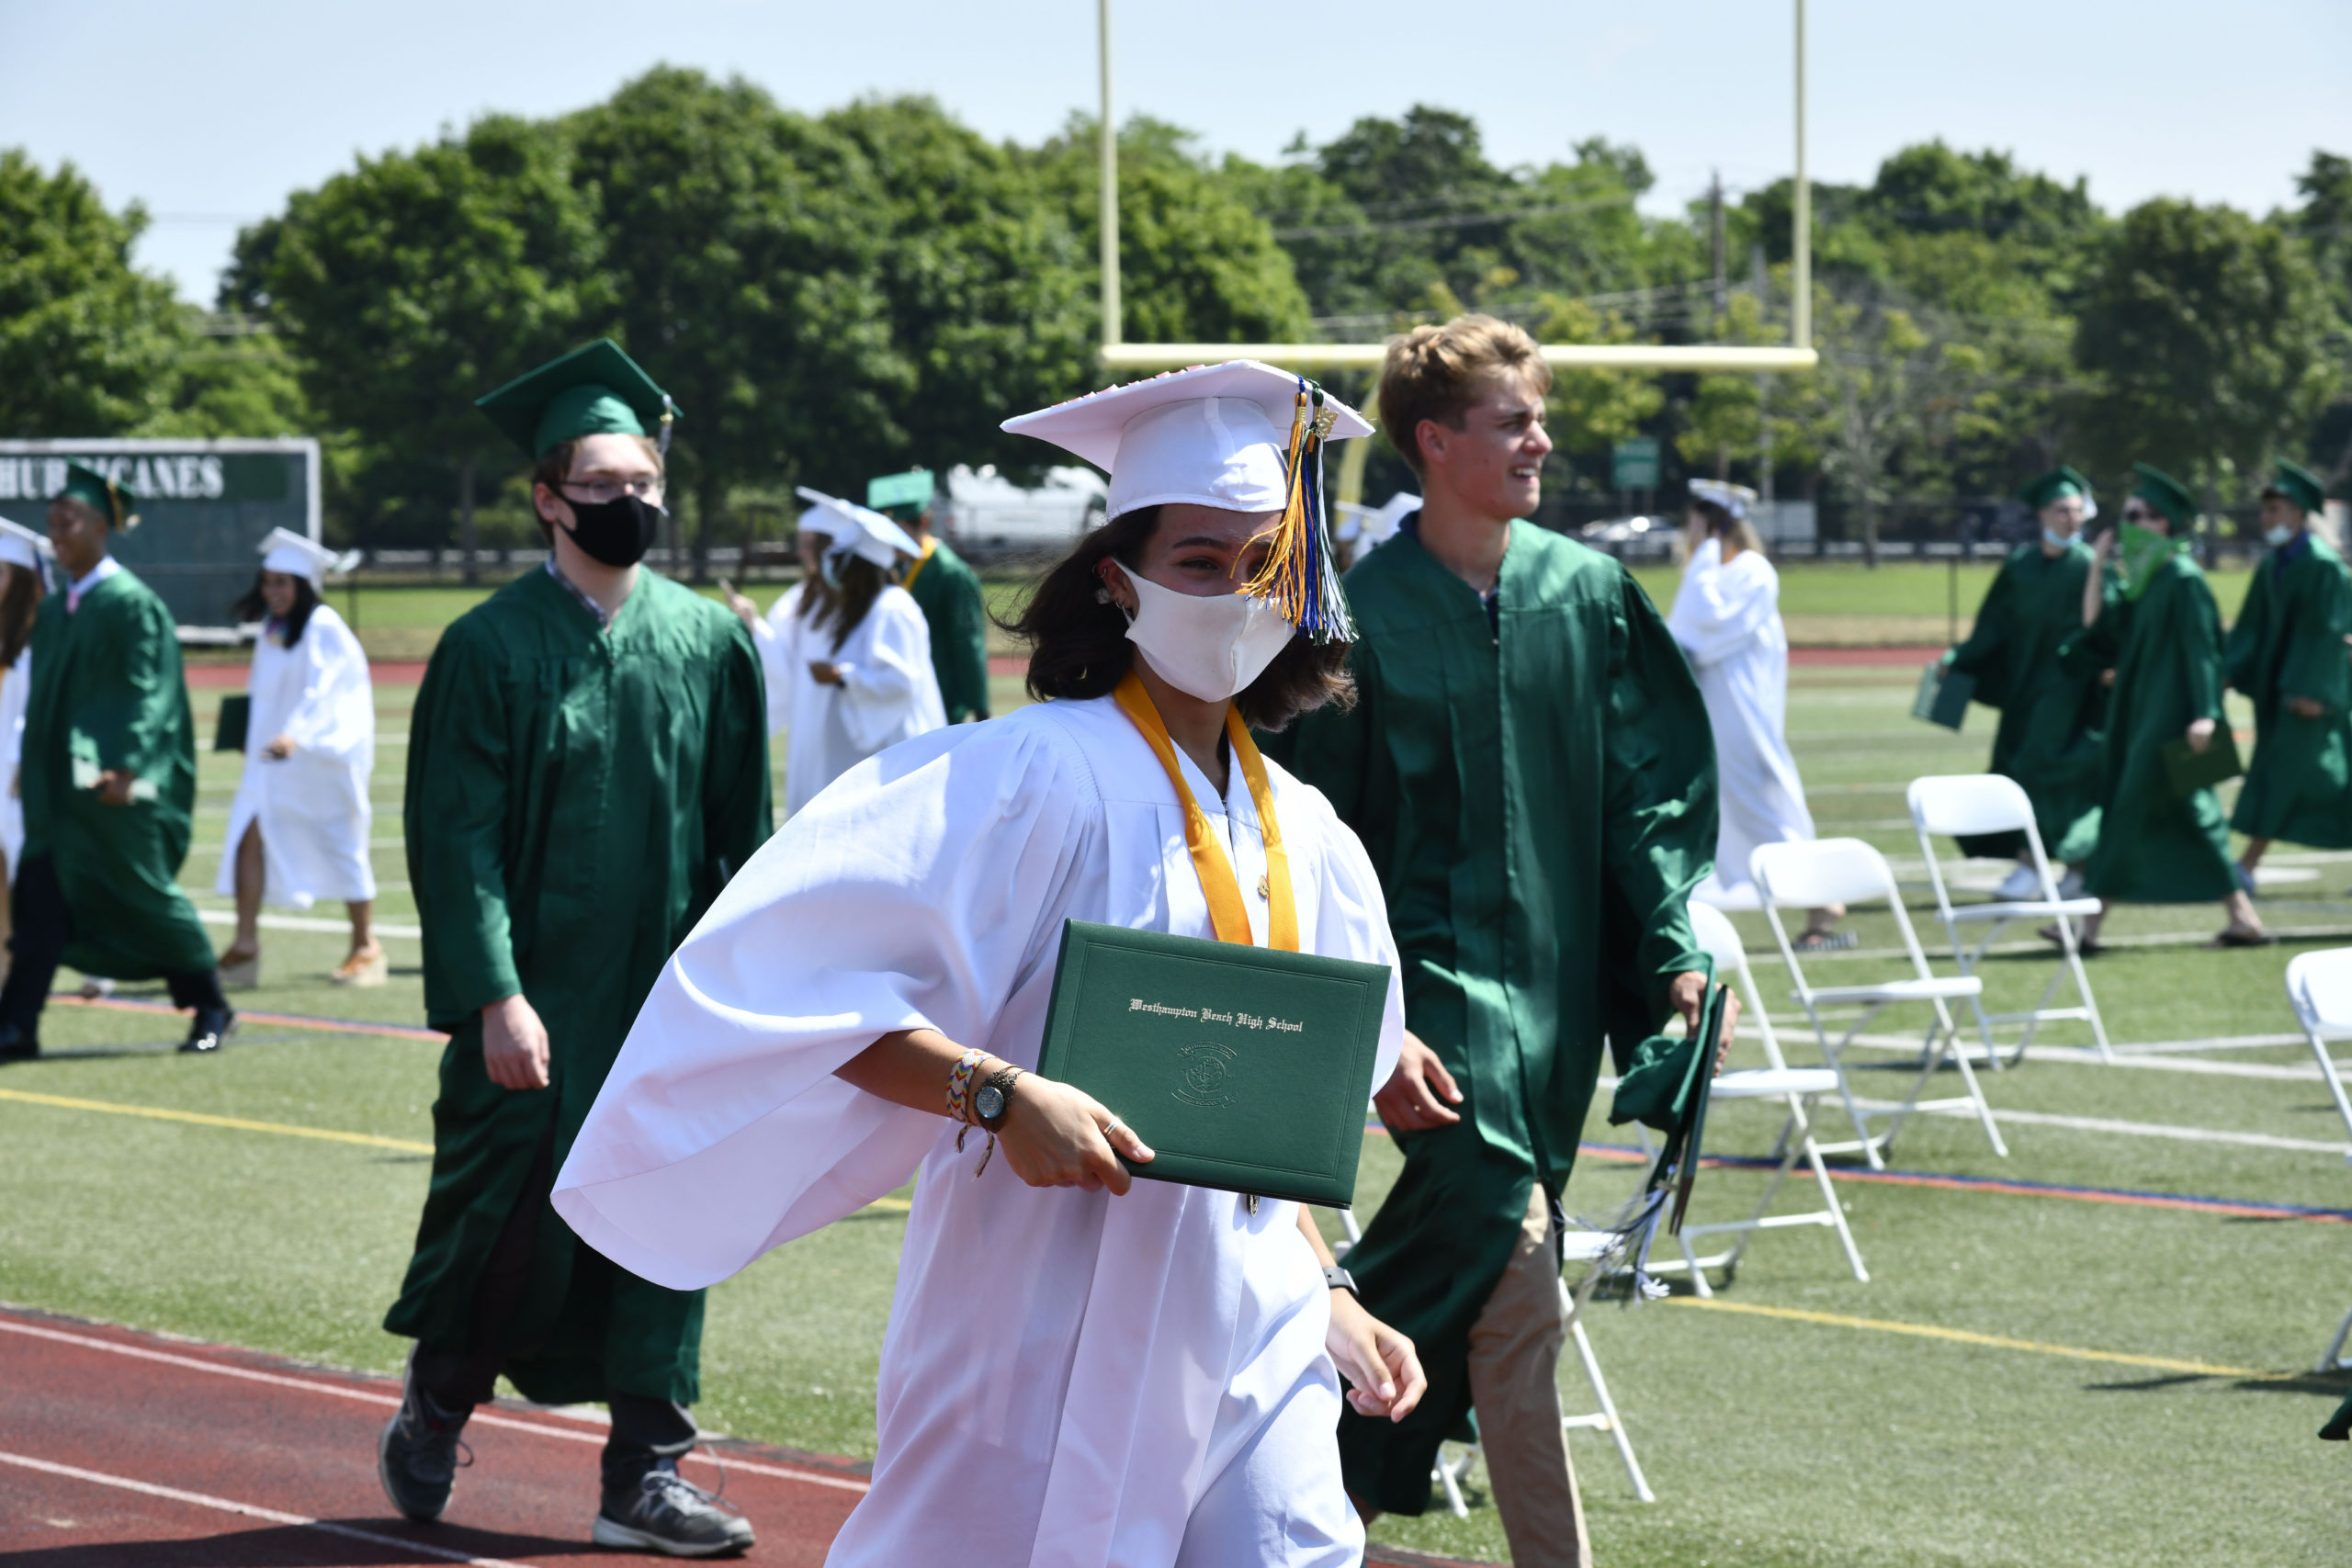 Westhampton Beach High School hosted its 112th commencement on Friday.